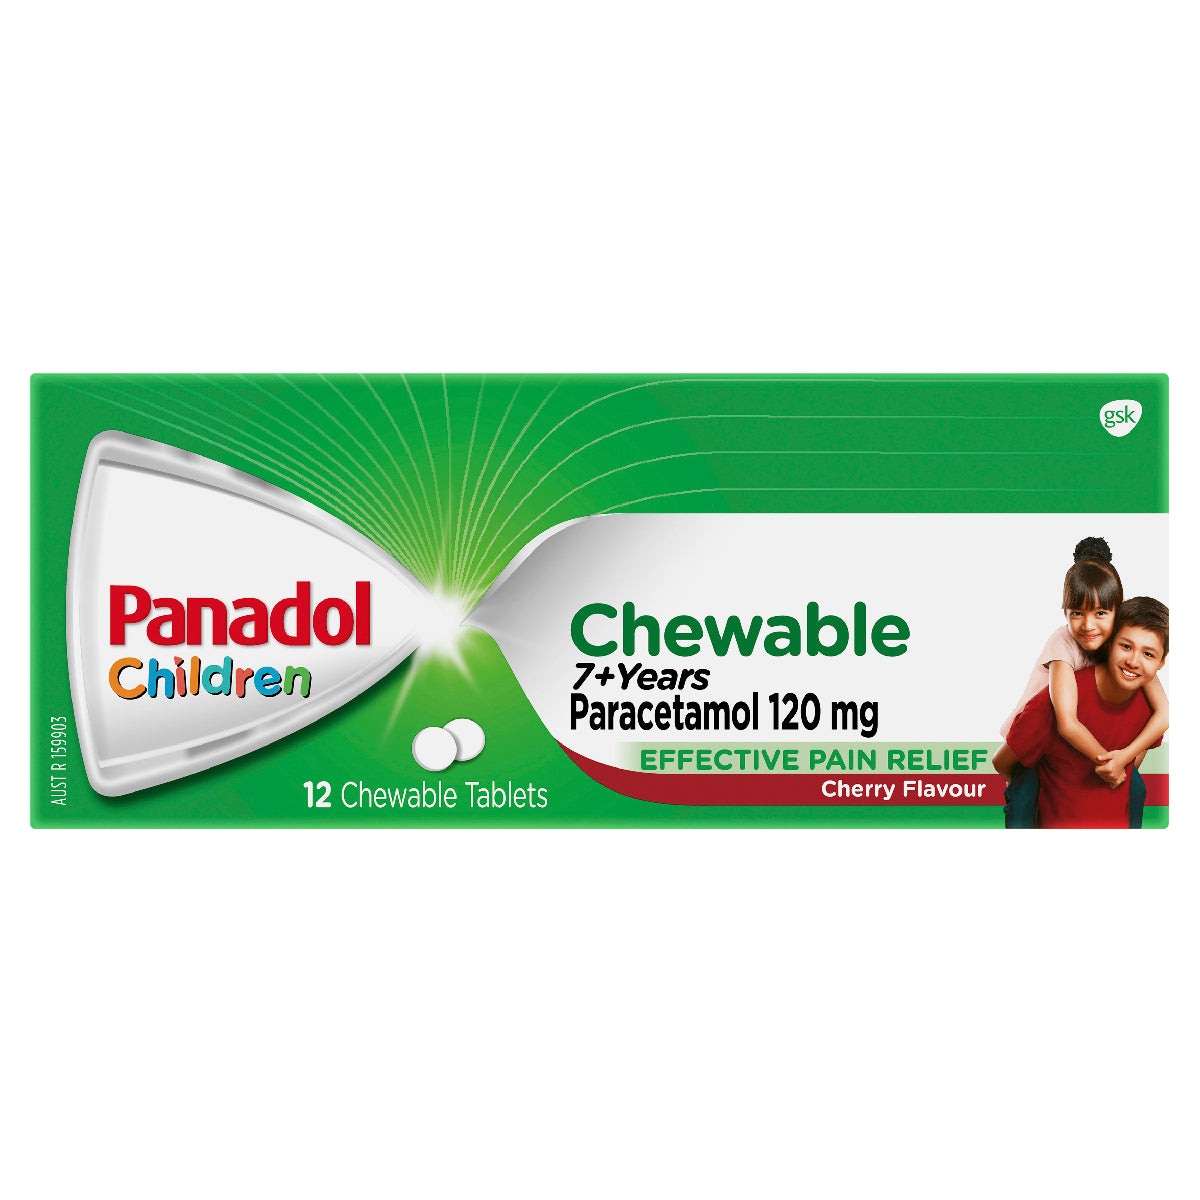 Panadol Childrens Chewable Tablets Cherry Flavour 12 Pack